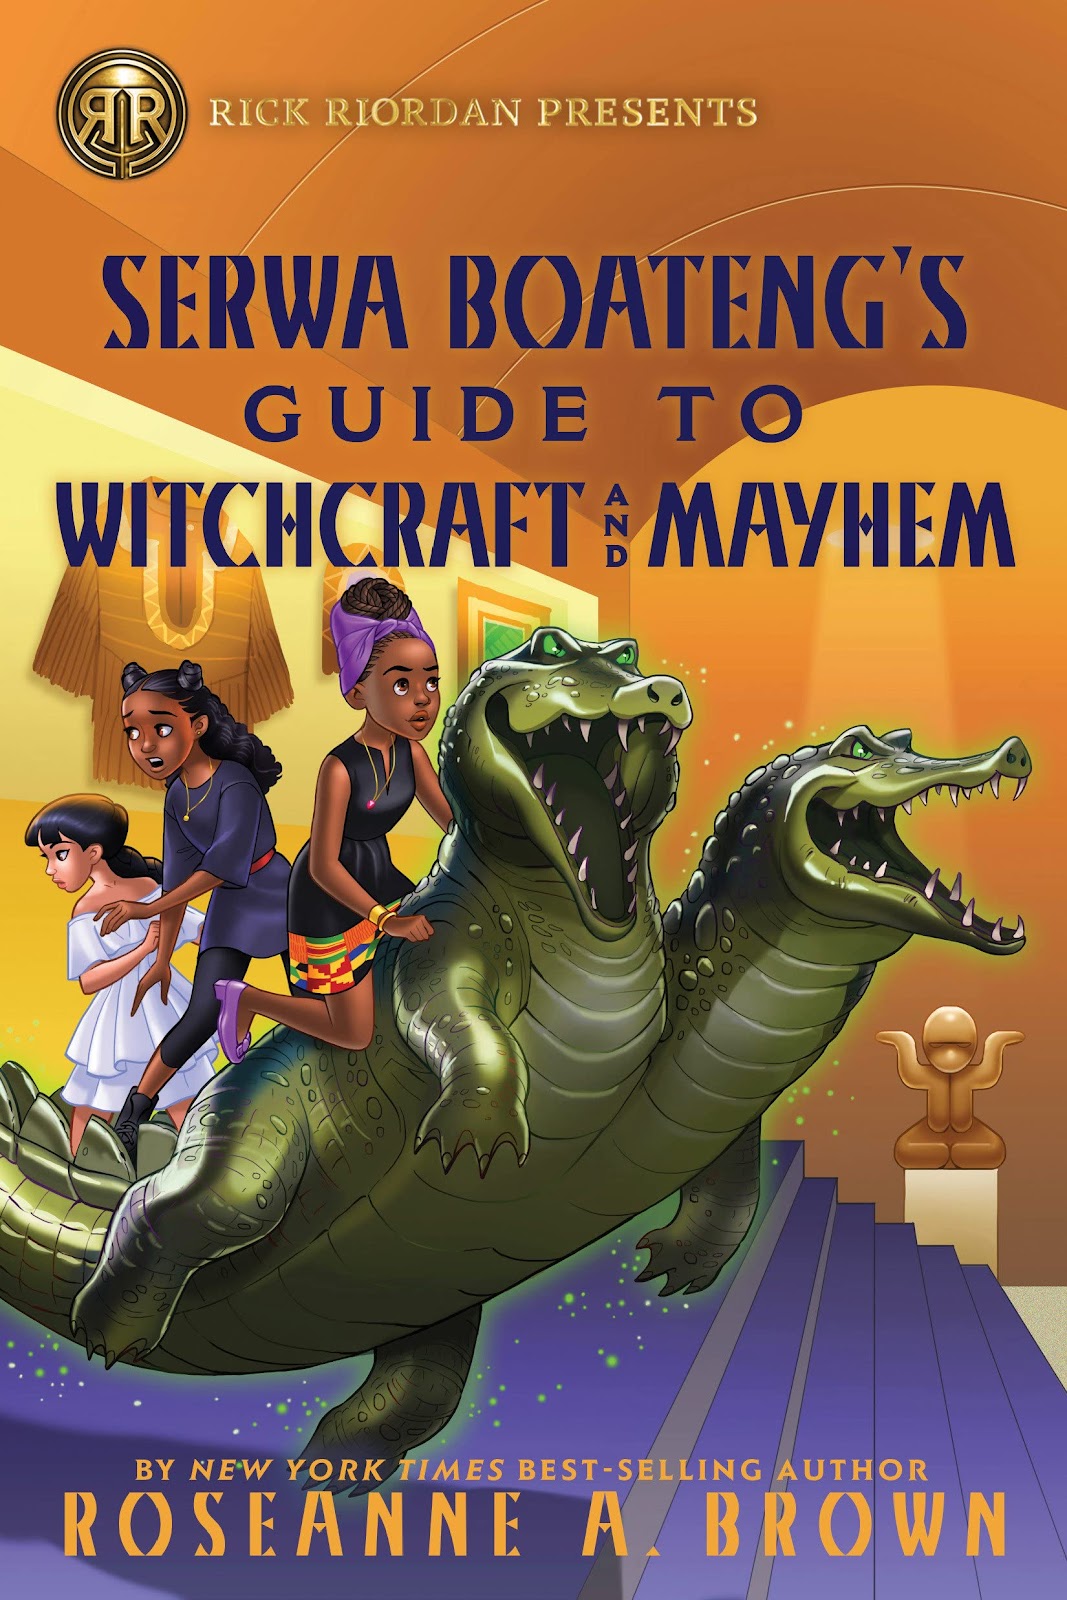 Serwa Boateng's Guide to Witchcraft and Mayhem by Roseanne A. Brown